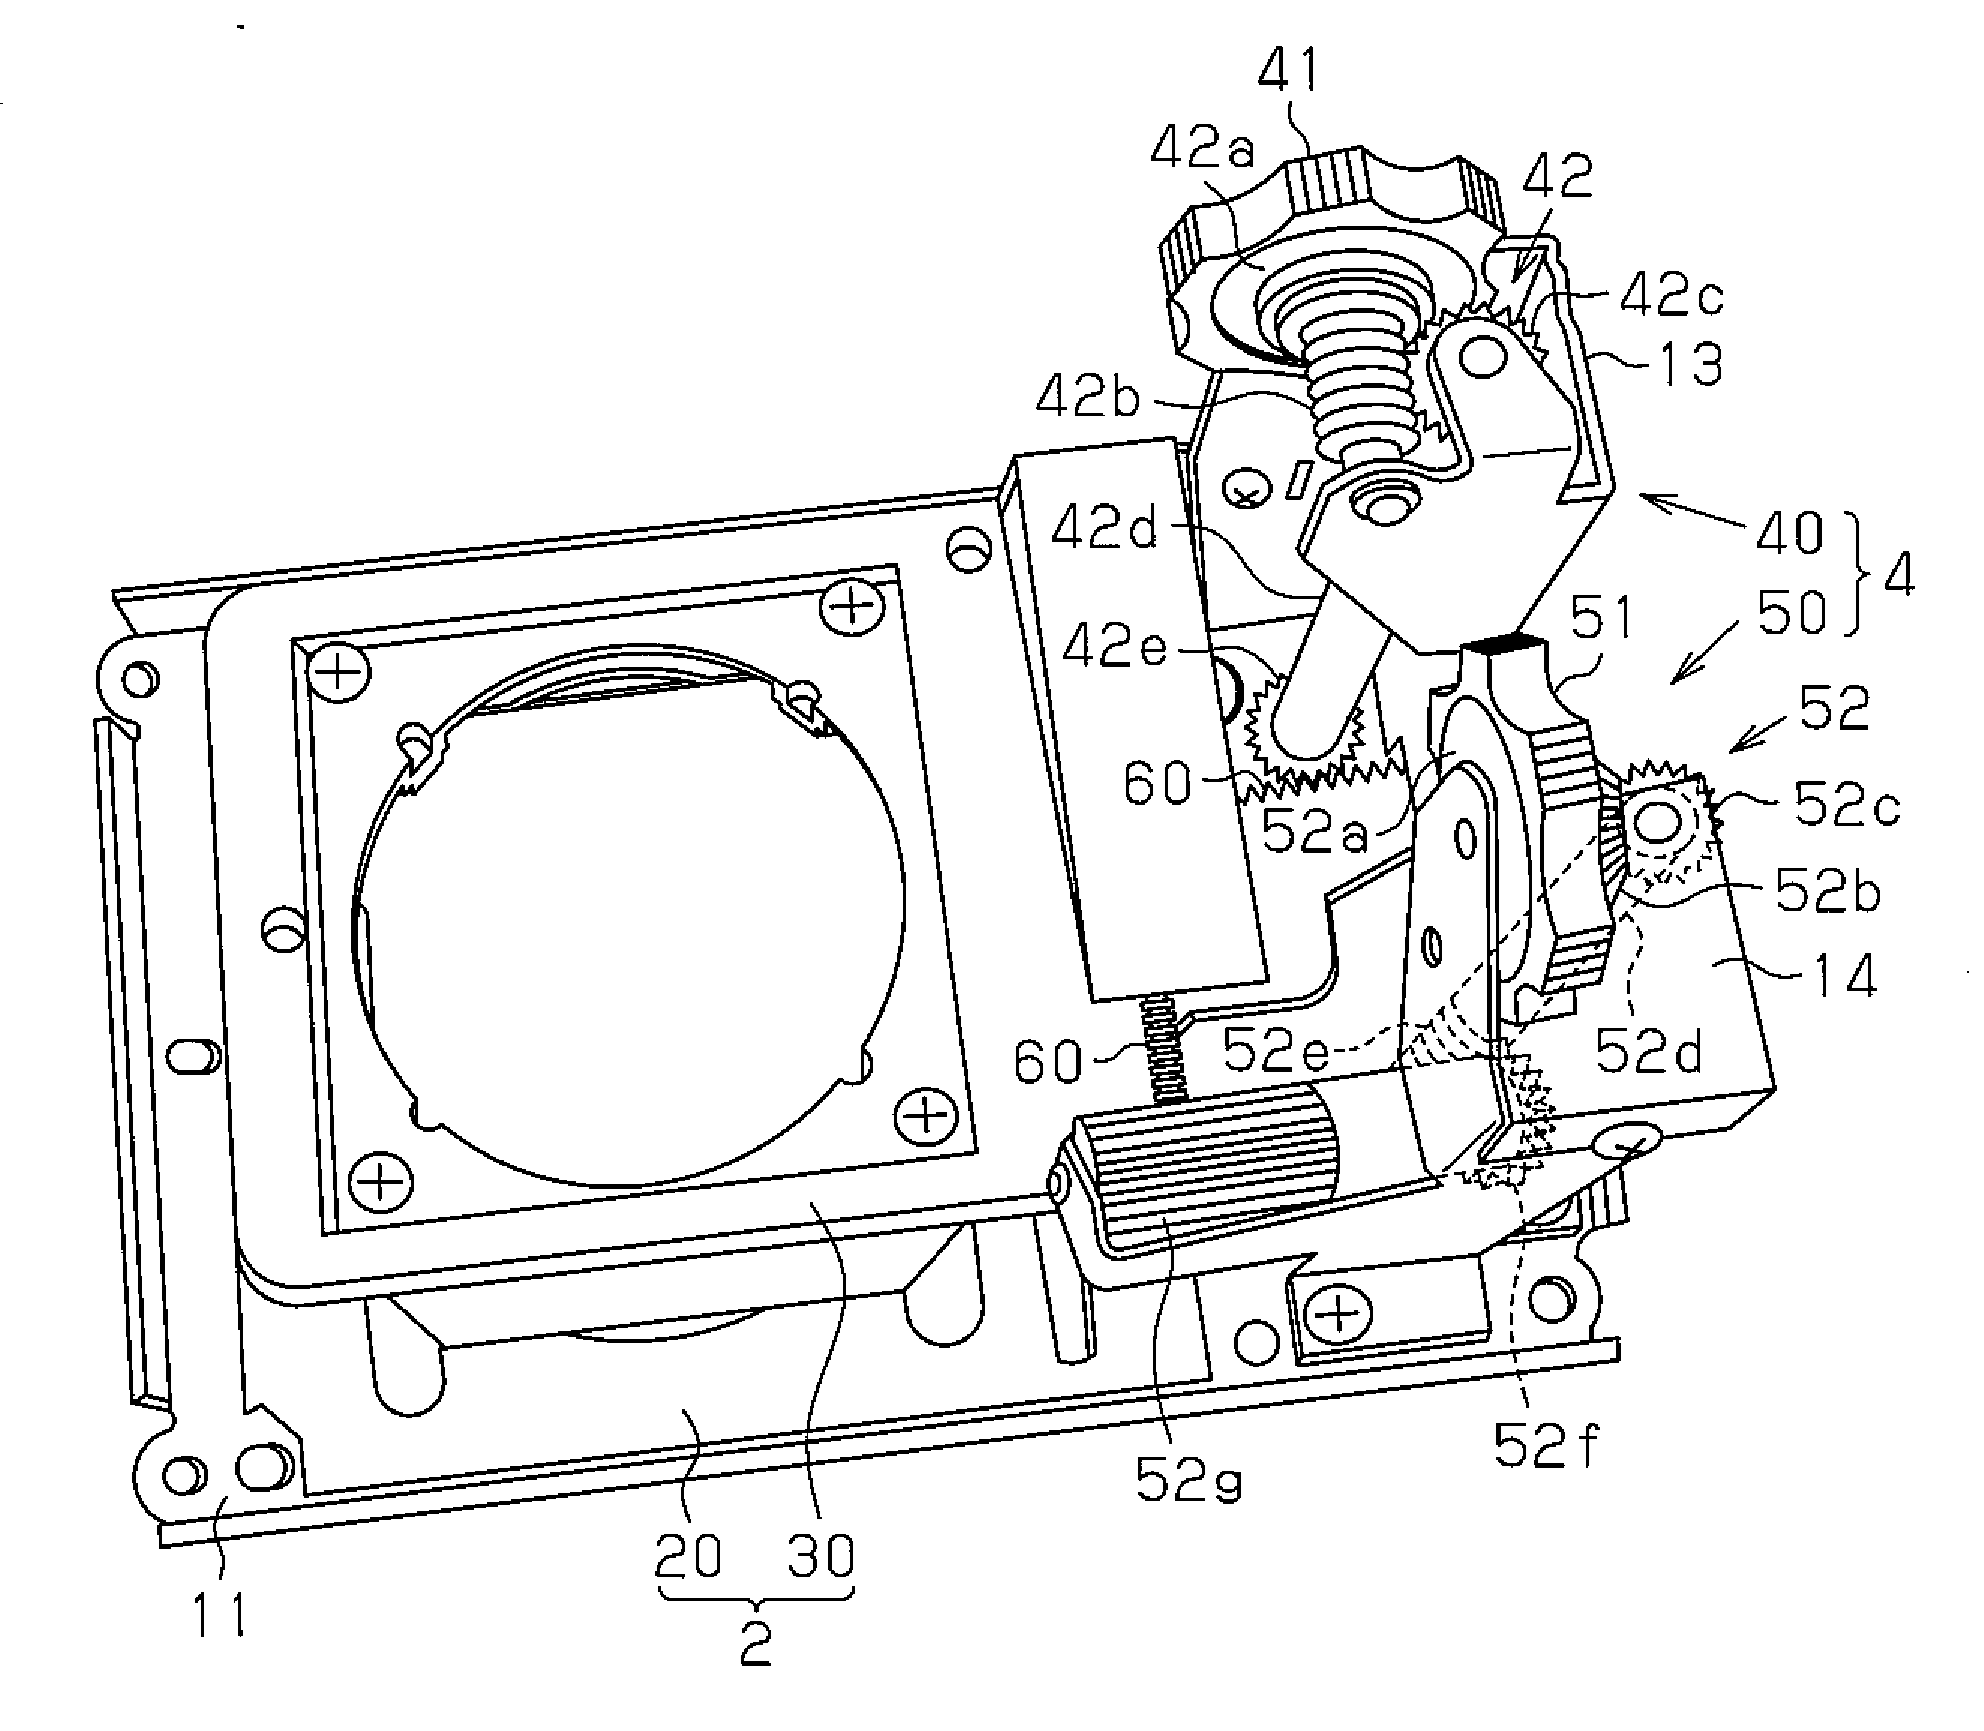 Lens shifter and projector using the same